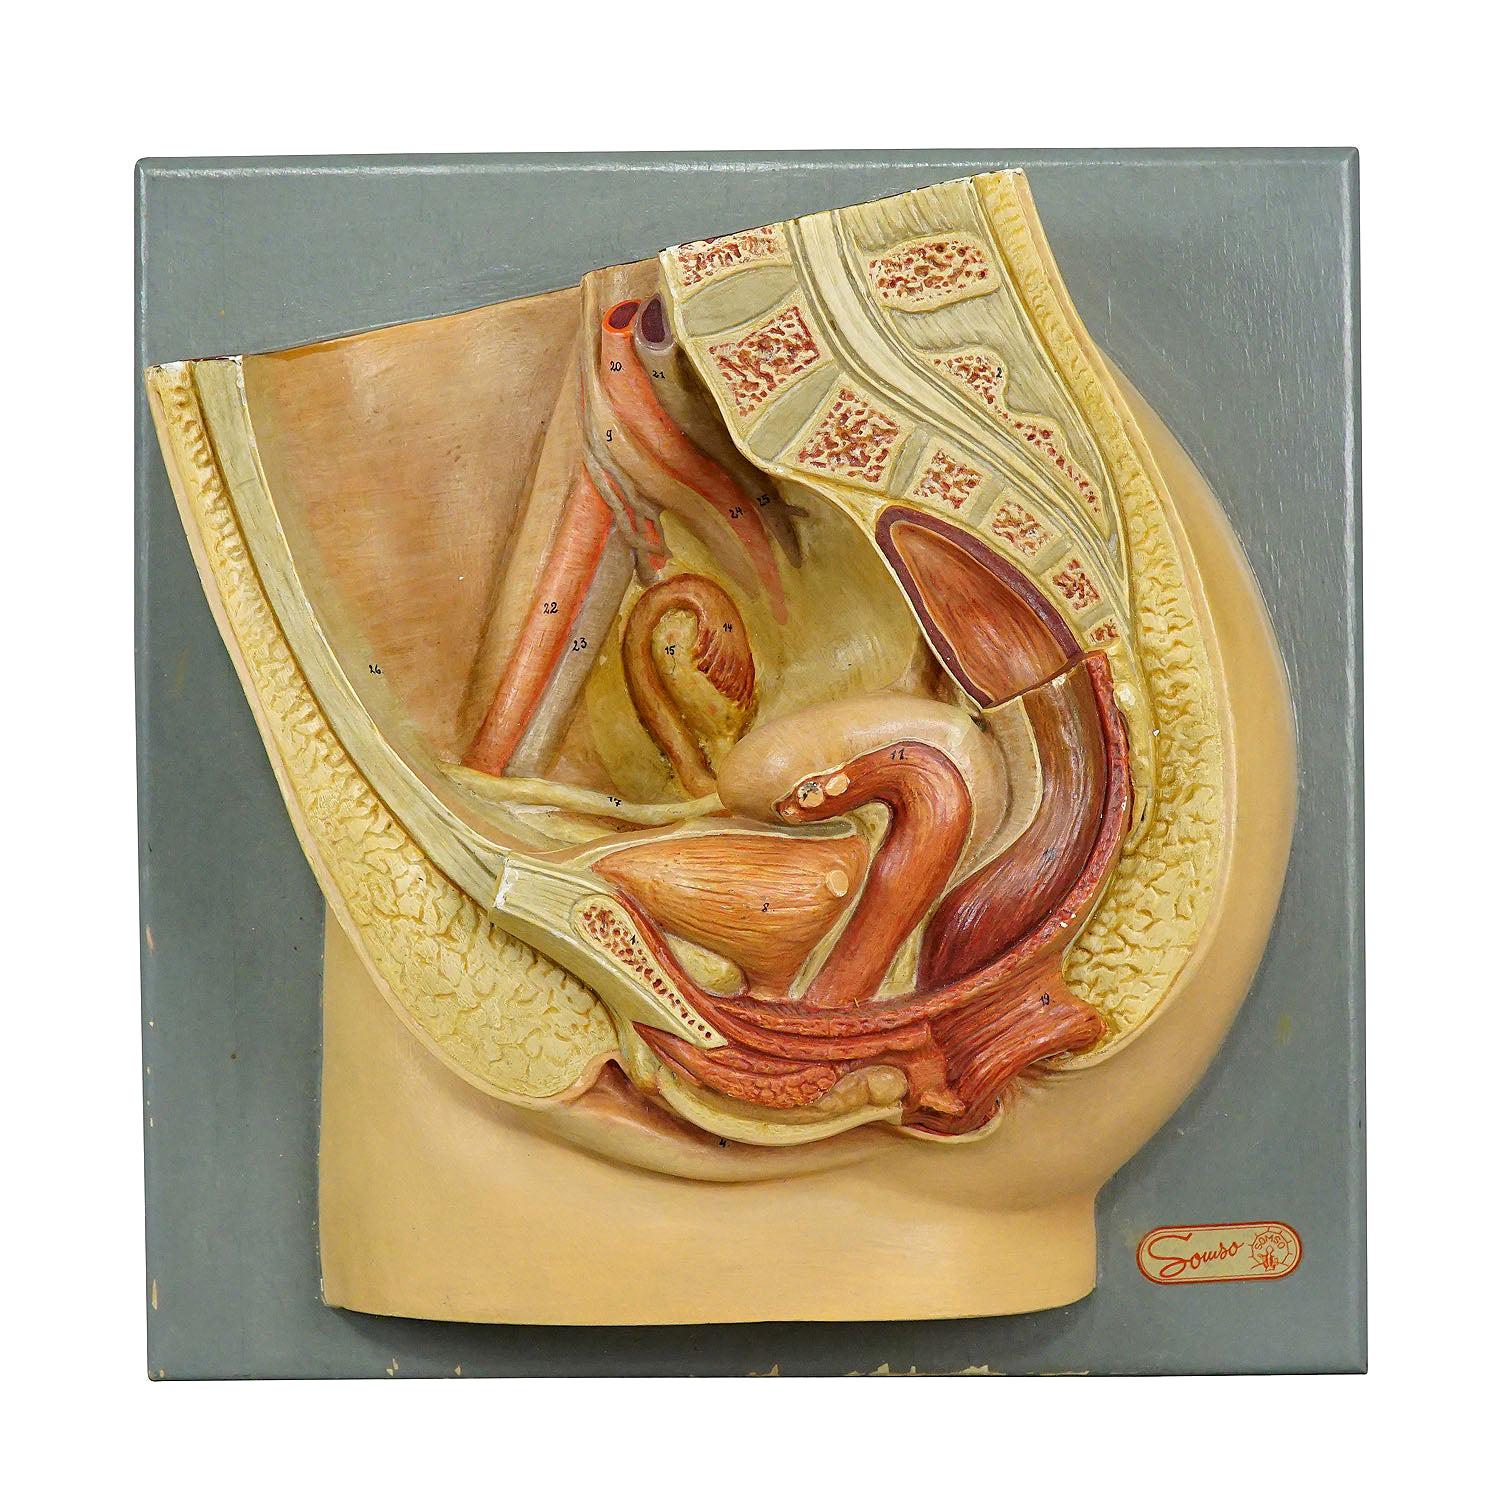 Anatomical Model, Median Incision of the Female Pelvic by Somso at 1stDibs